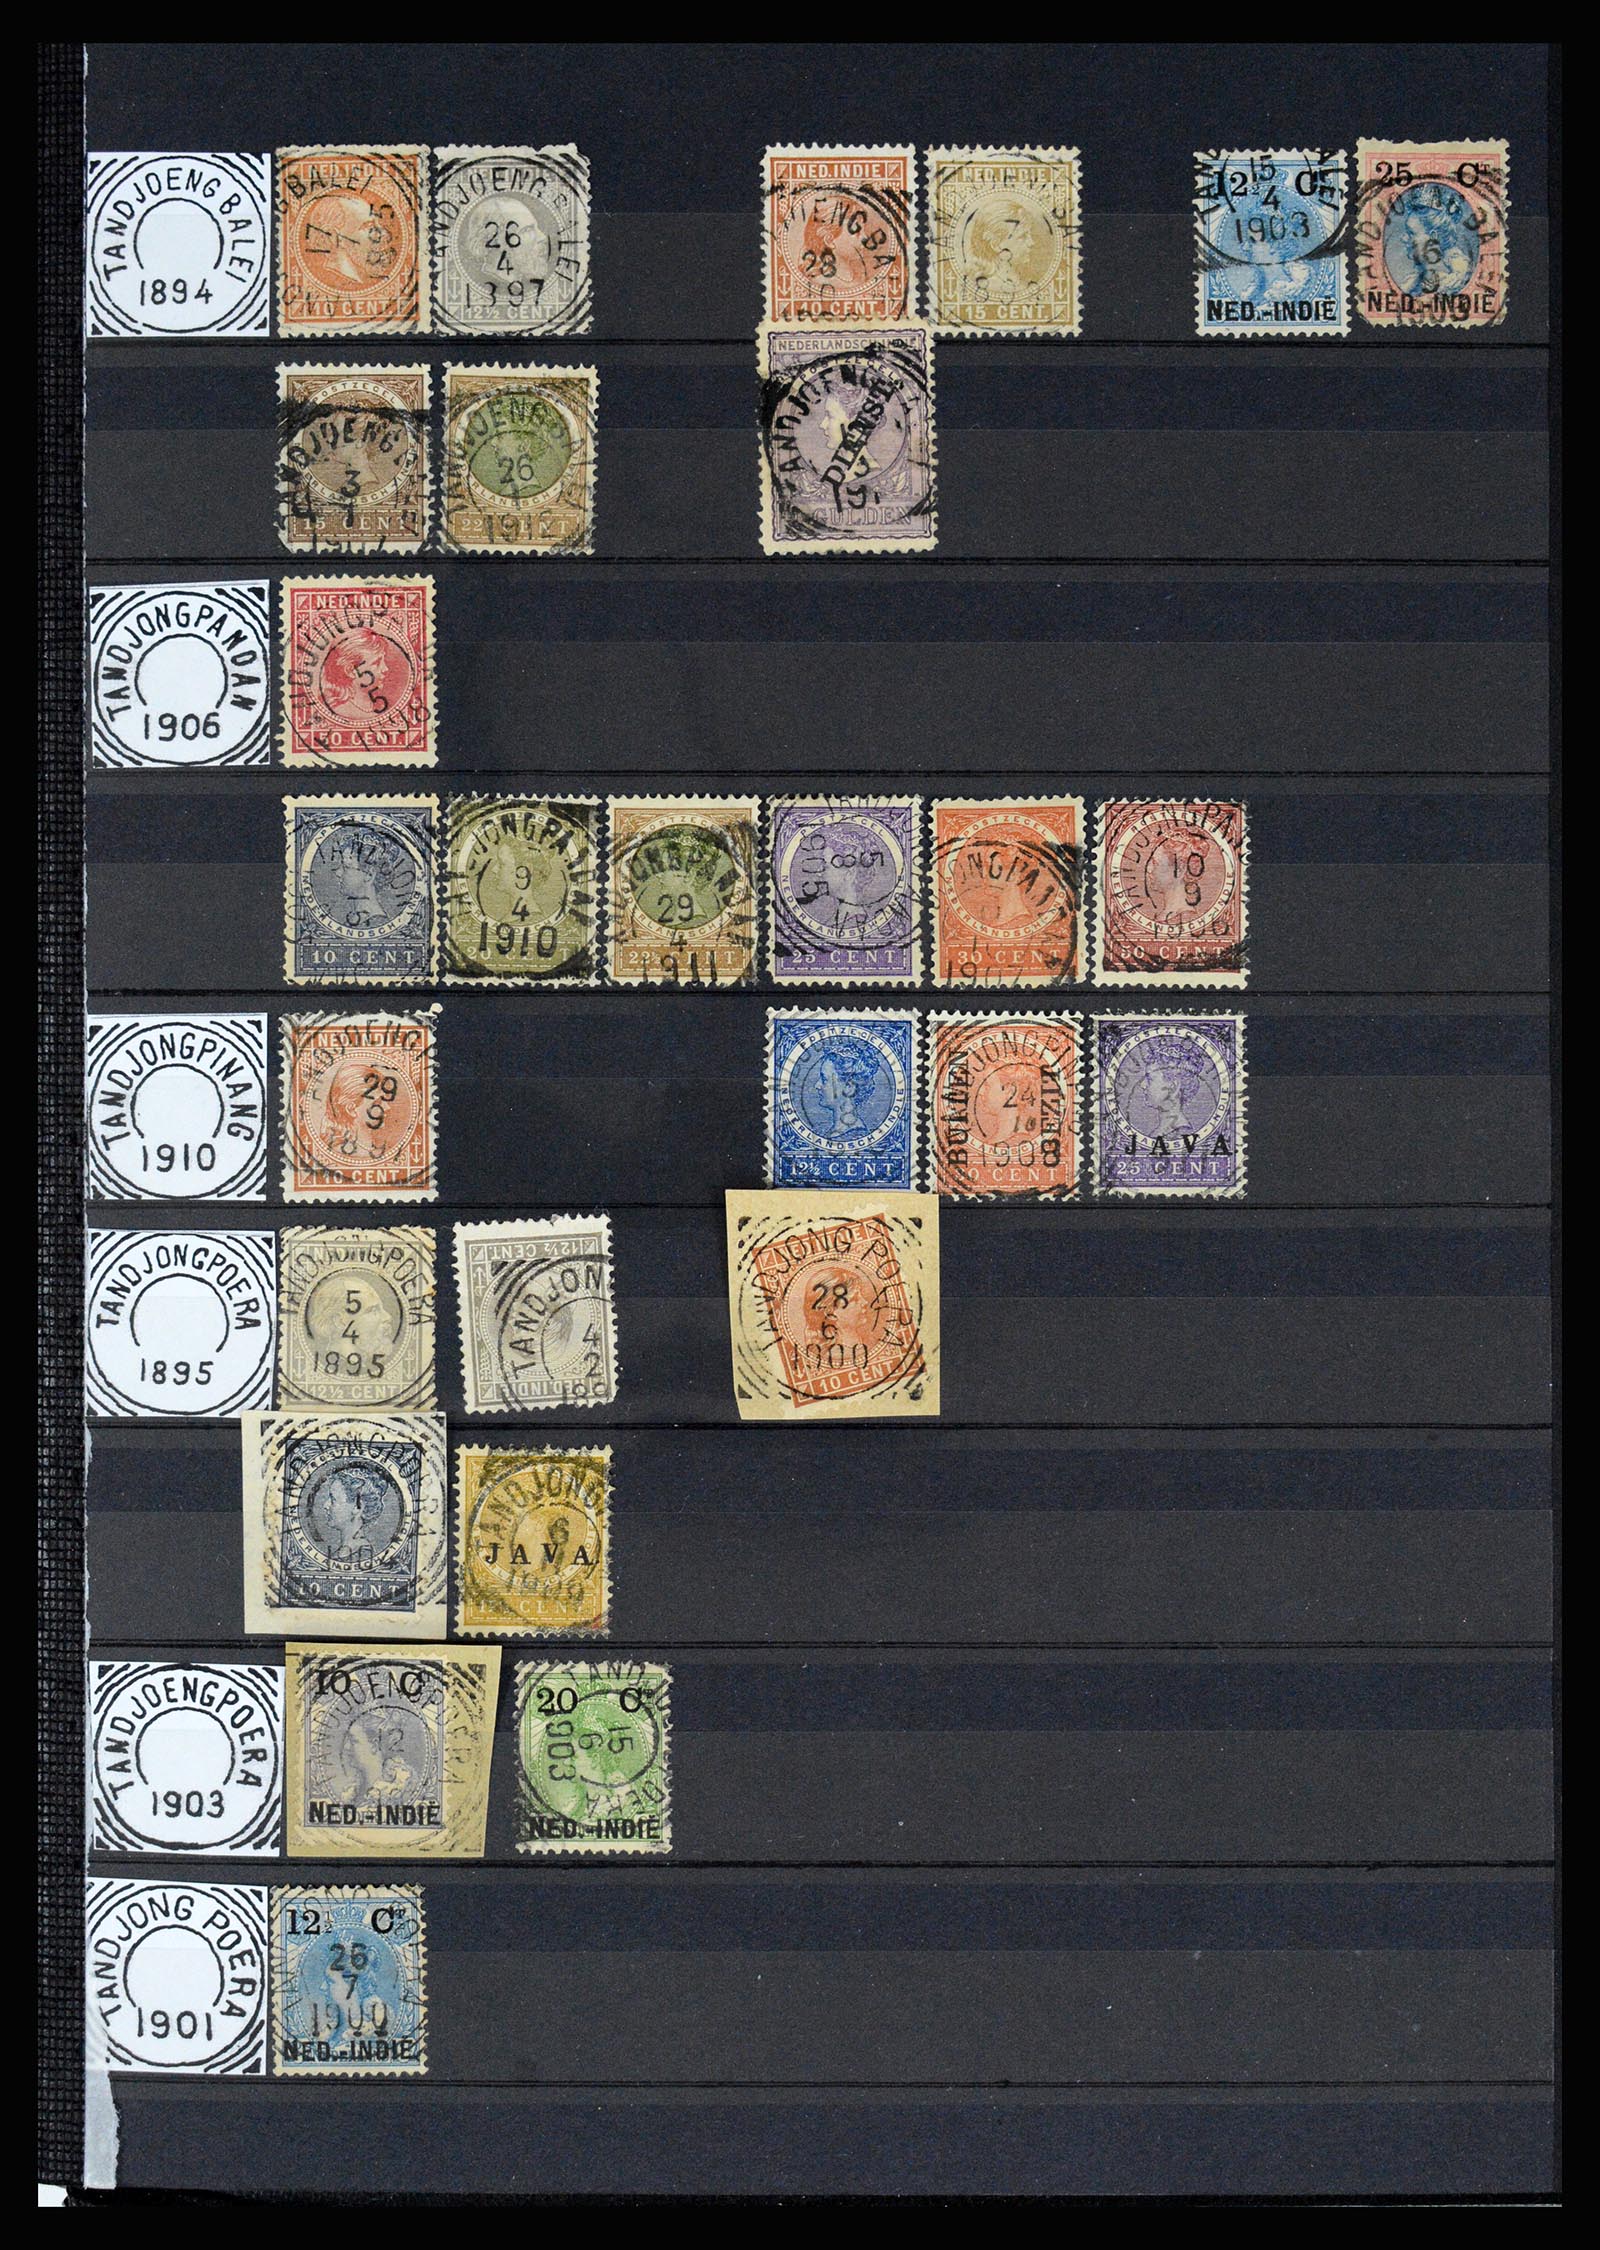 36839 052 - Stamp collection 36839 Dutch east Indies square cancels.